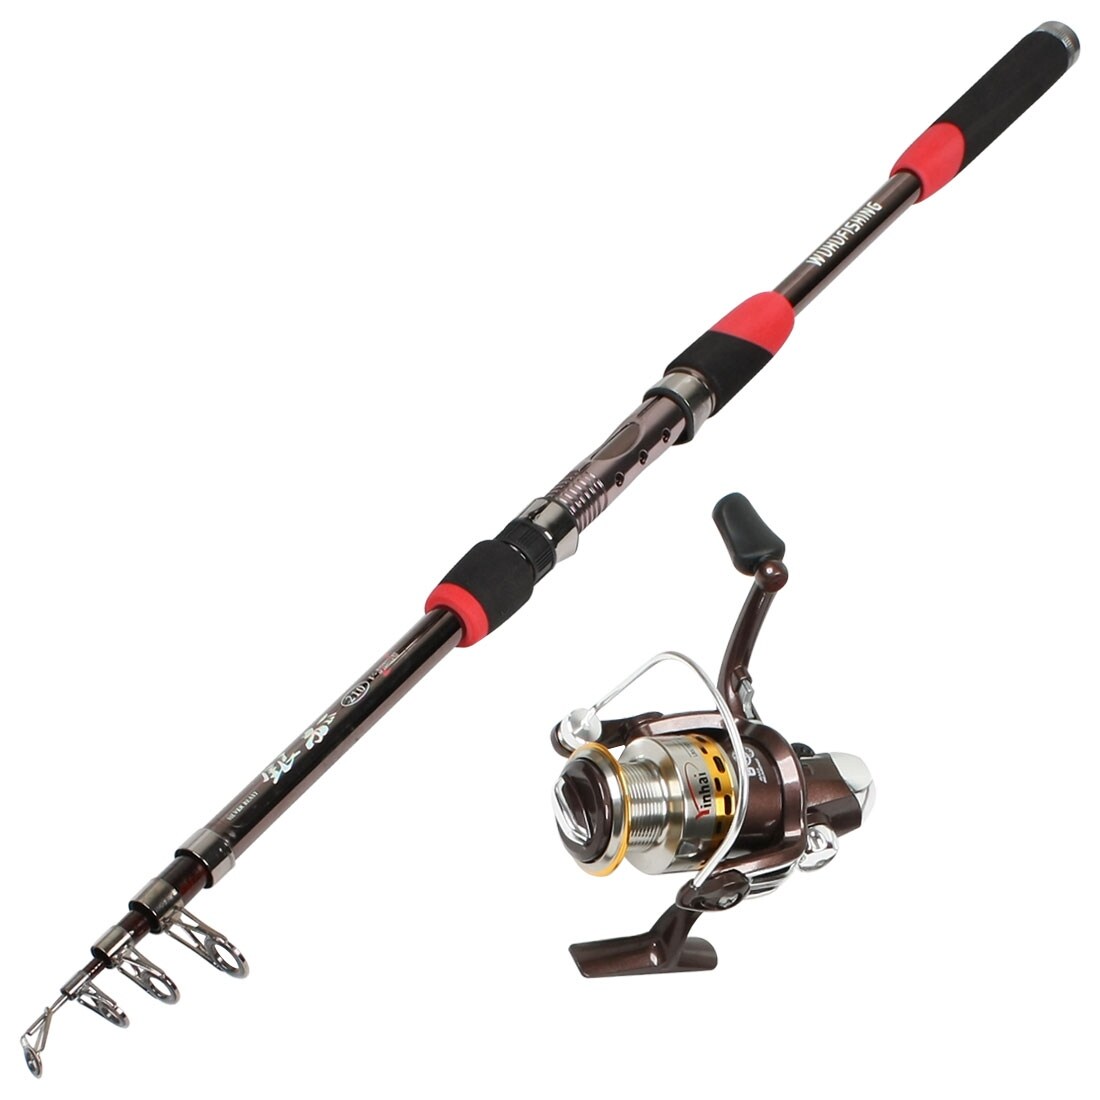 https://ak1.ostkcdn.com/images/products/is/images/direct/8379e774c0410faef3033e69c62f9d9374203772/Black-Chocolate-Color-5-Sections-Telescoping-Fishing-Rod-Pole-2.1-Meters.jpg